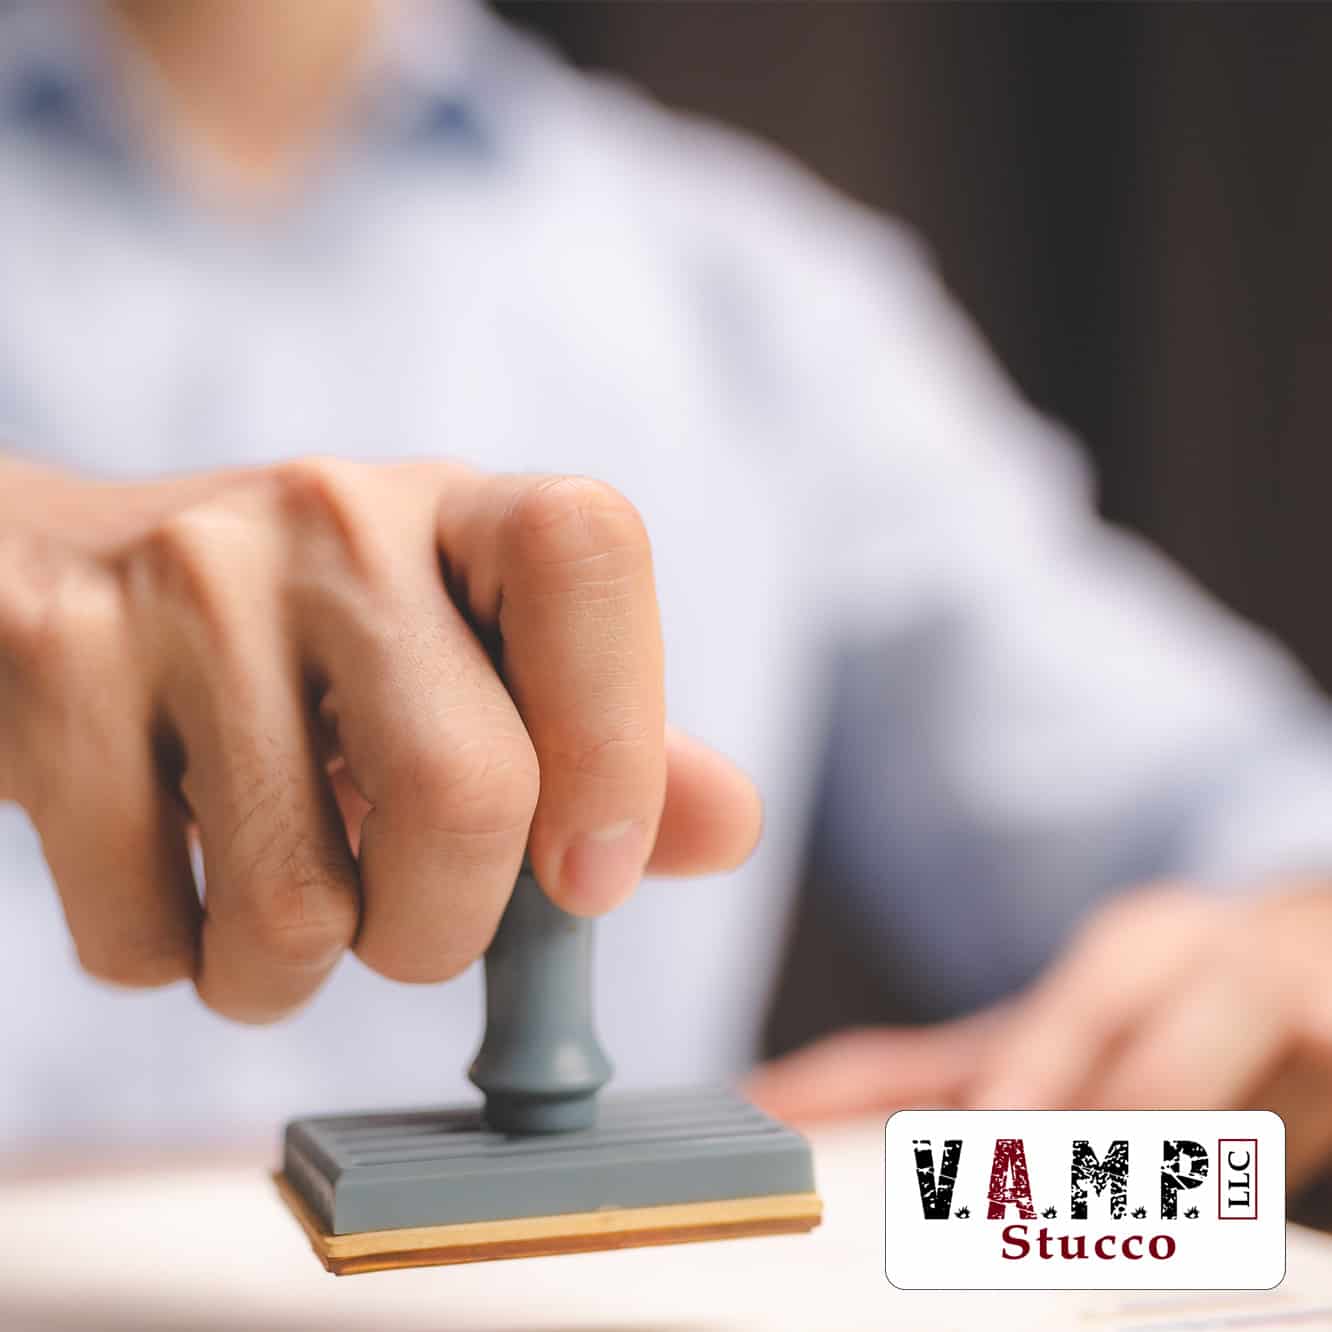 Man placing an approval stamp on a stucco project permit, signifying V.A.M.P. Stucco's commitment to quality and reliable service as outlined in our meta description.